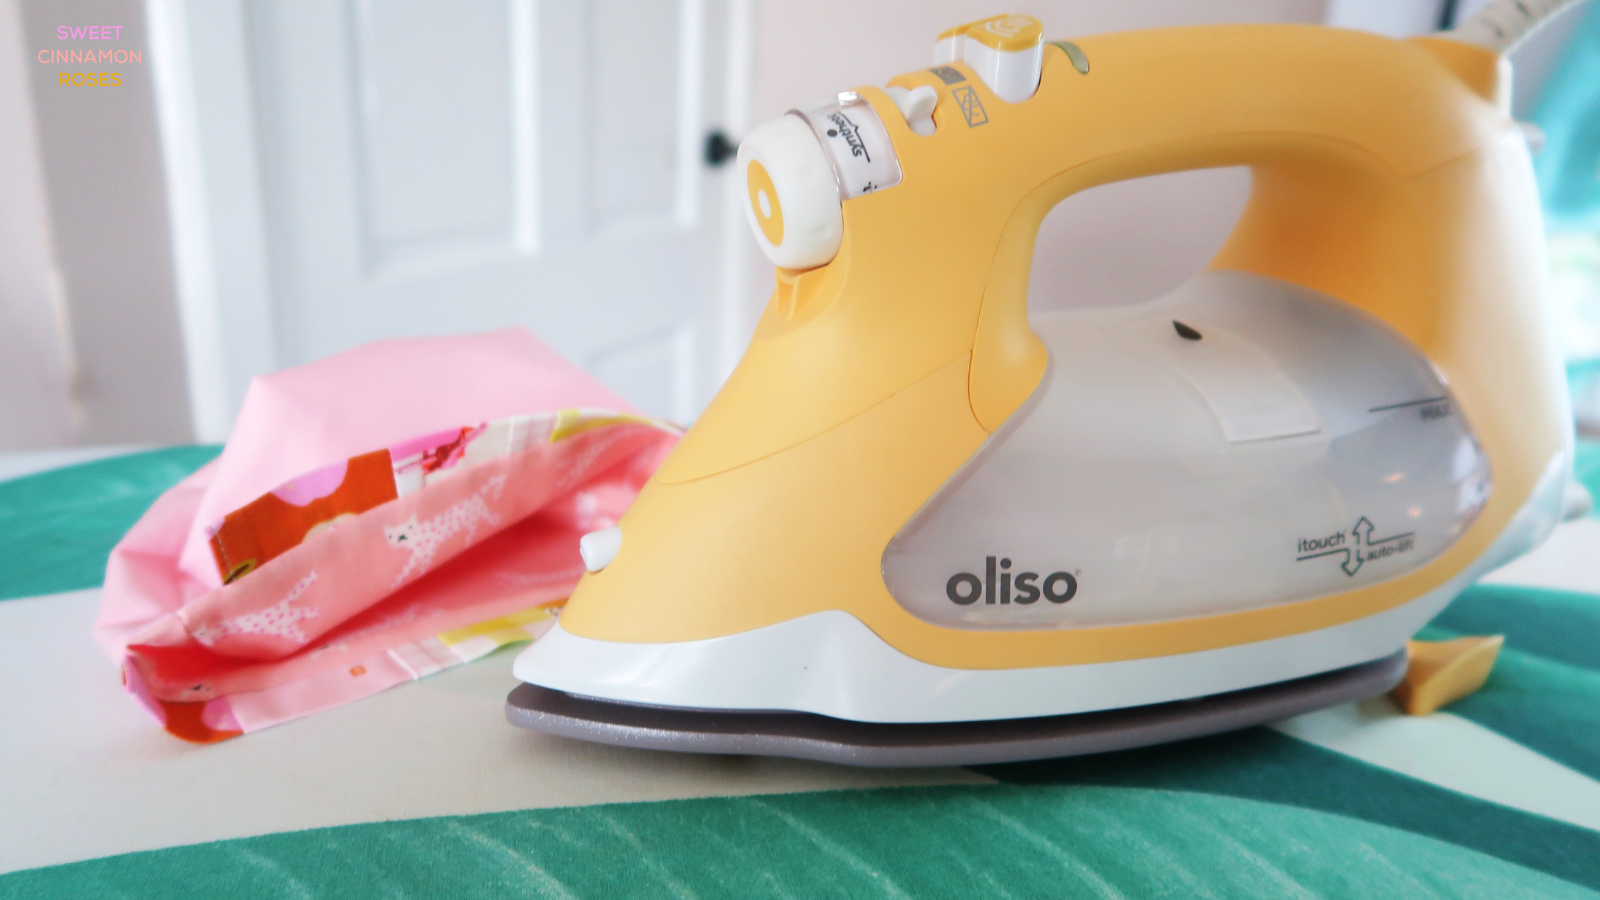 Quilting Digest - This mini iron is especially popular